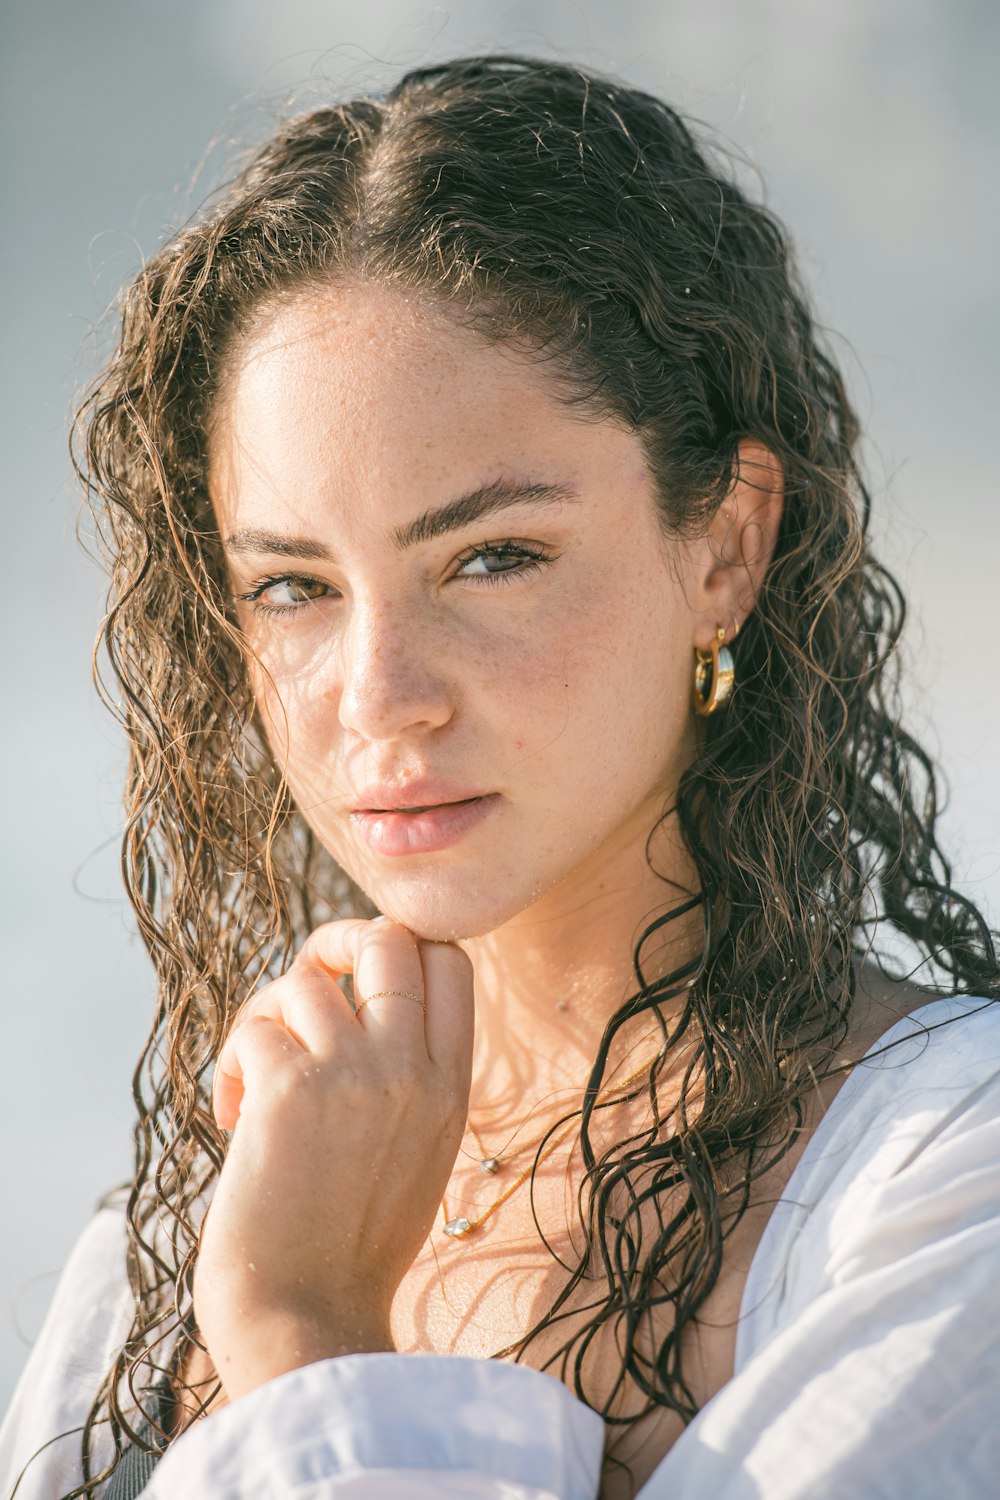 a woman with curly hair wearing a white dress